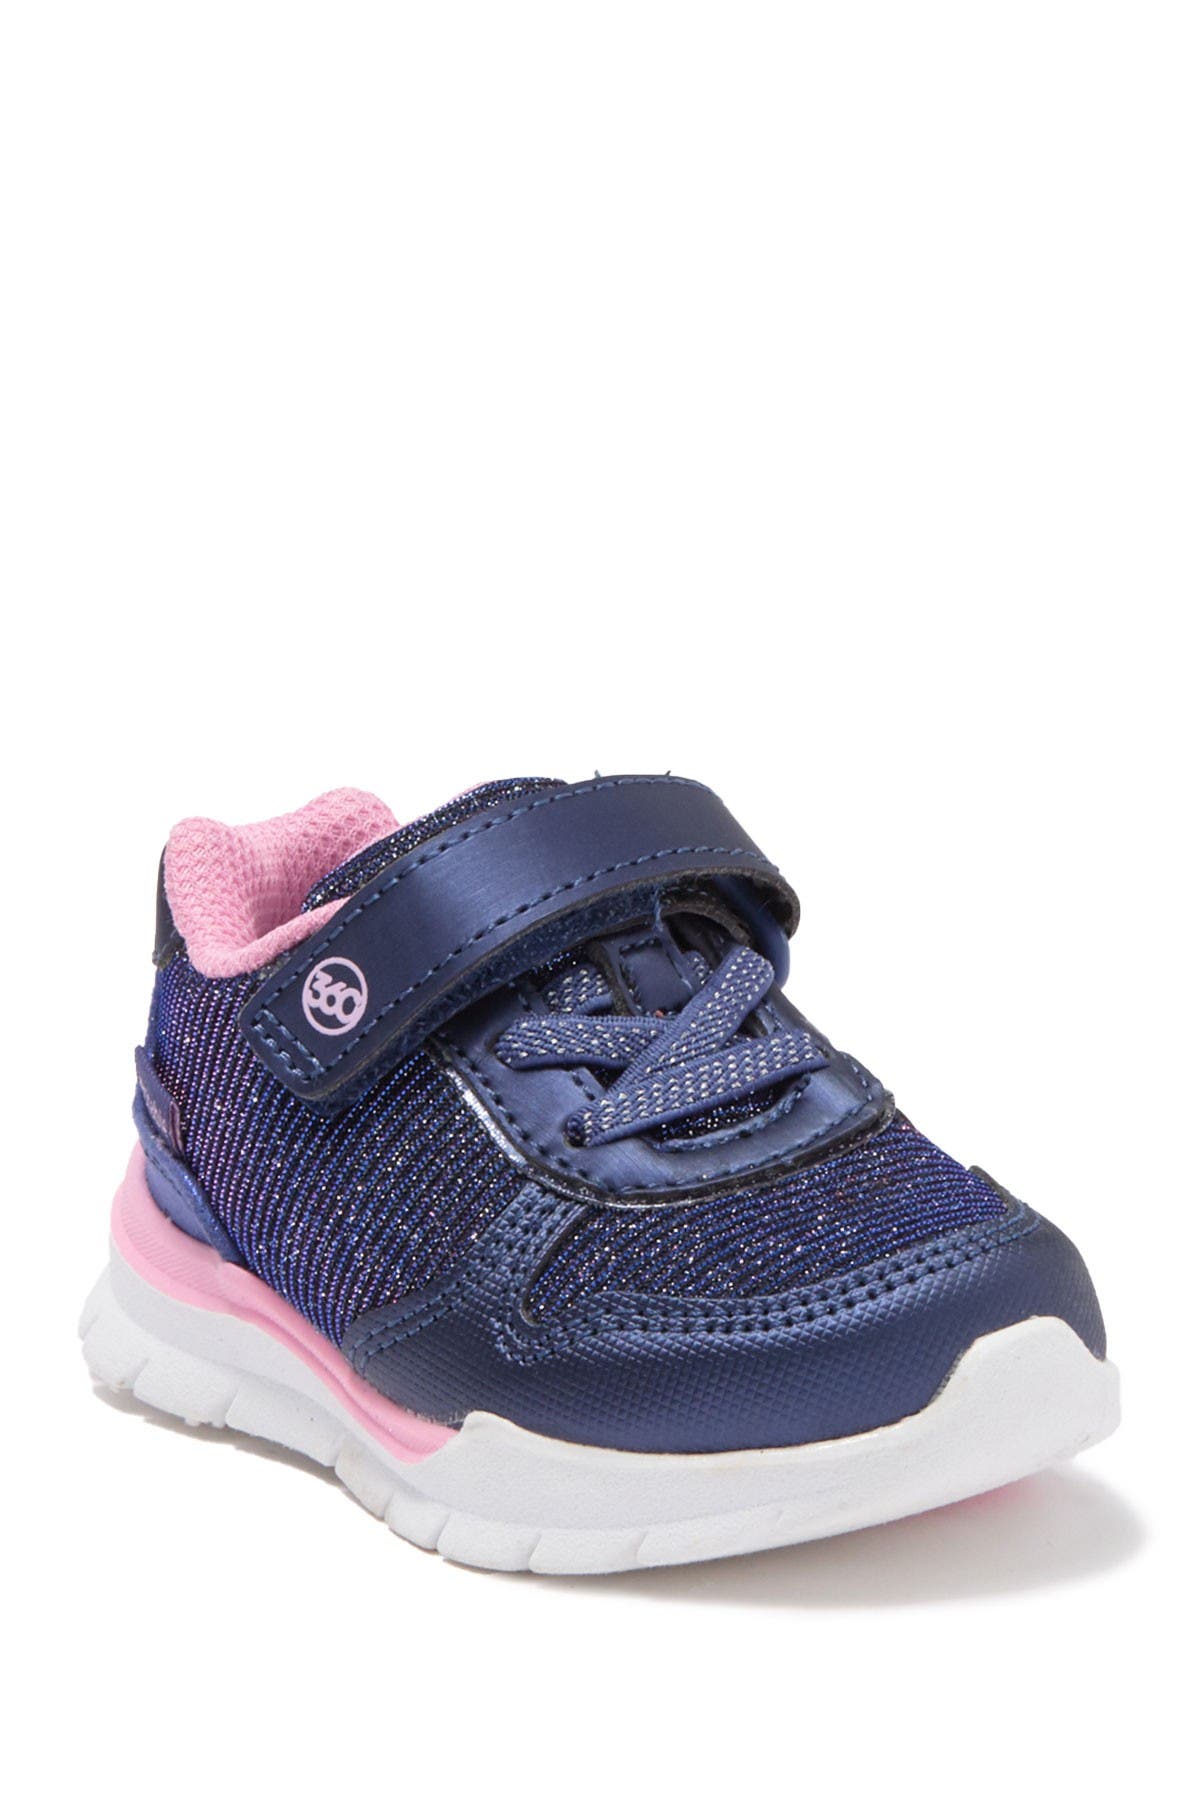 stride rite sneakers for toddlers